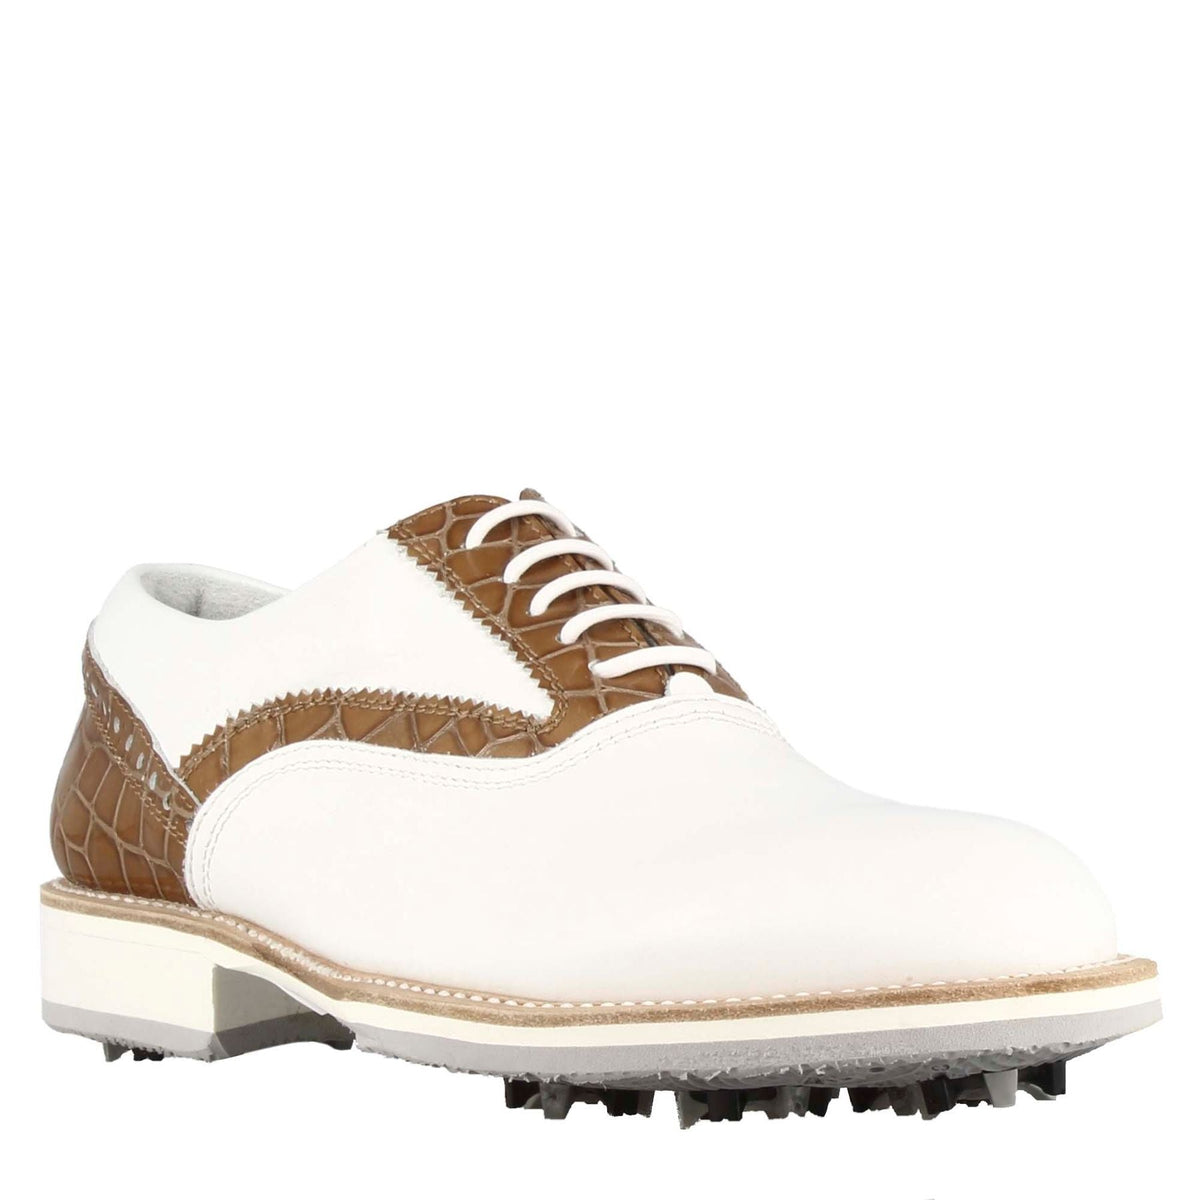 Handcrafted men's golf shoes in white leather with light brown details